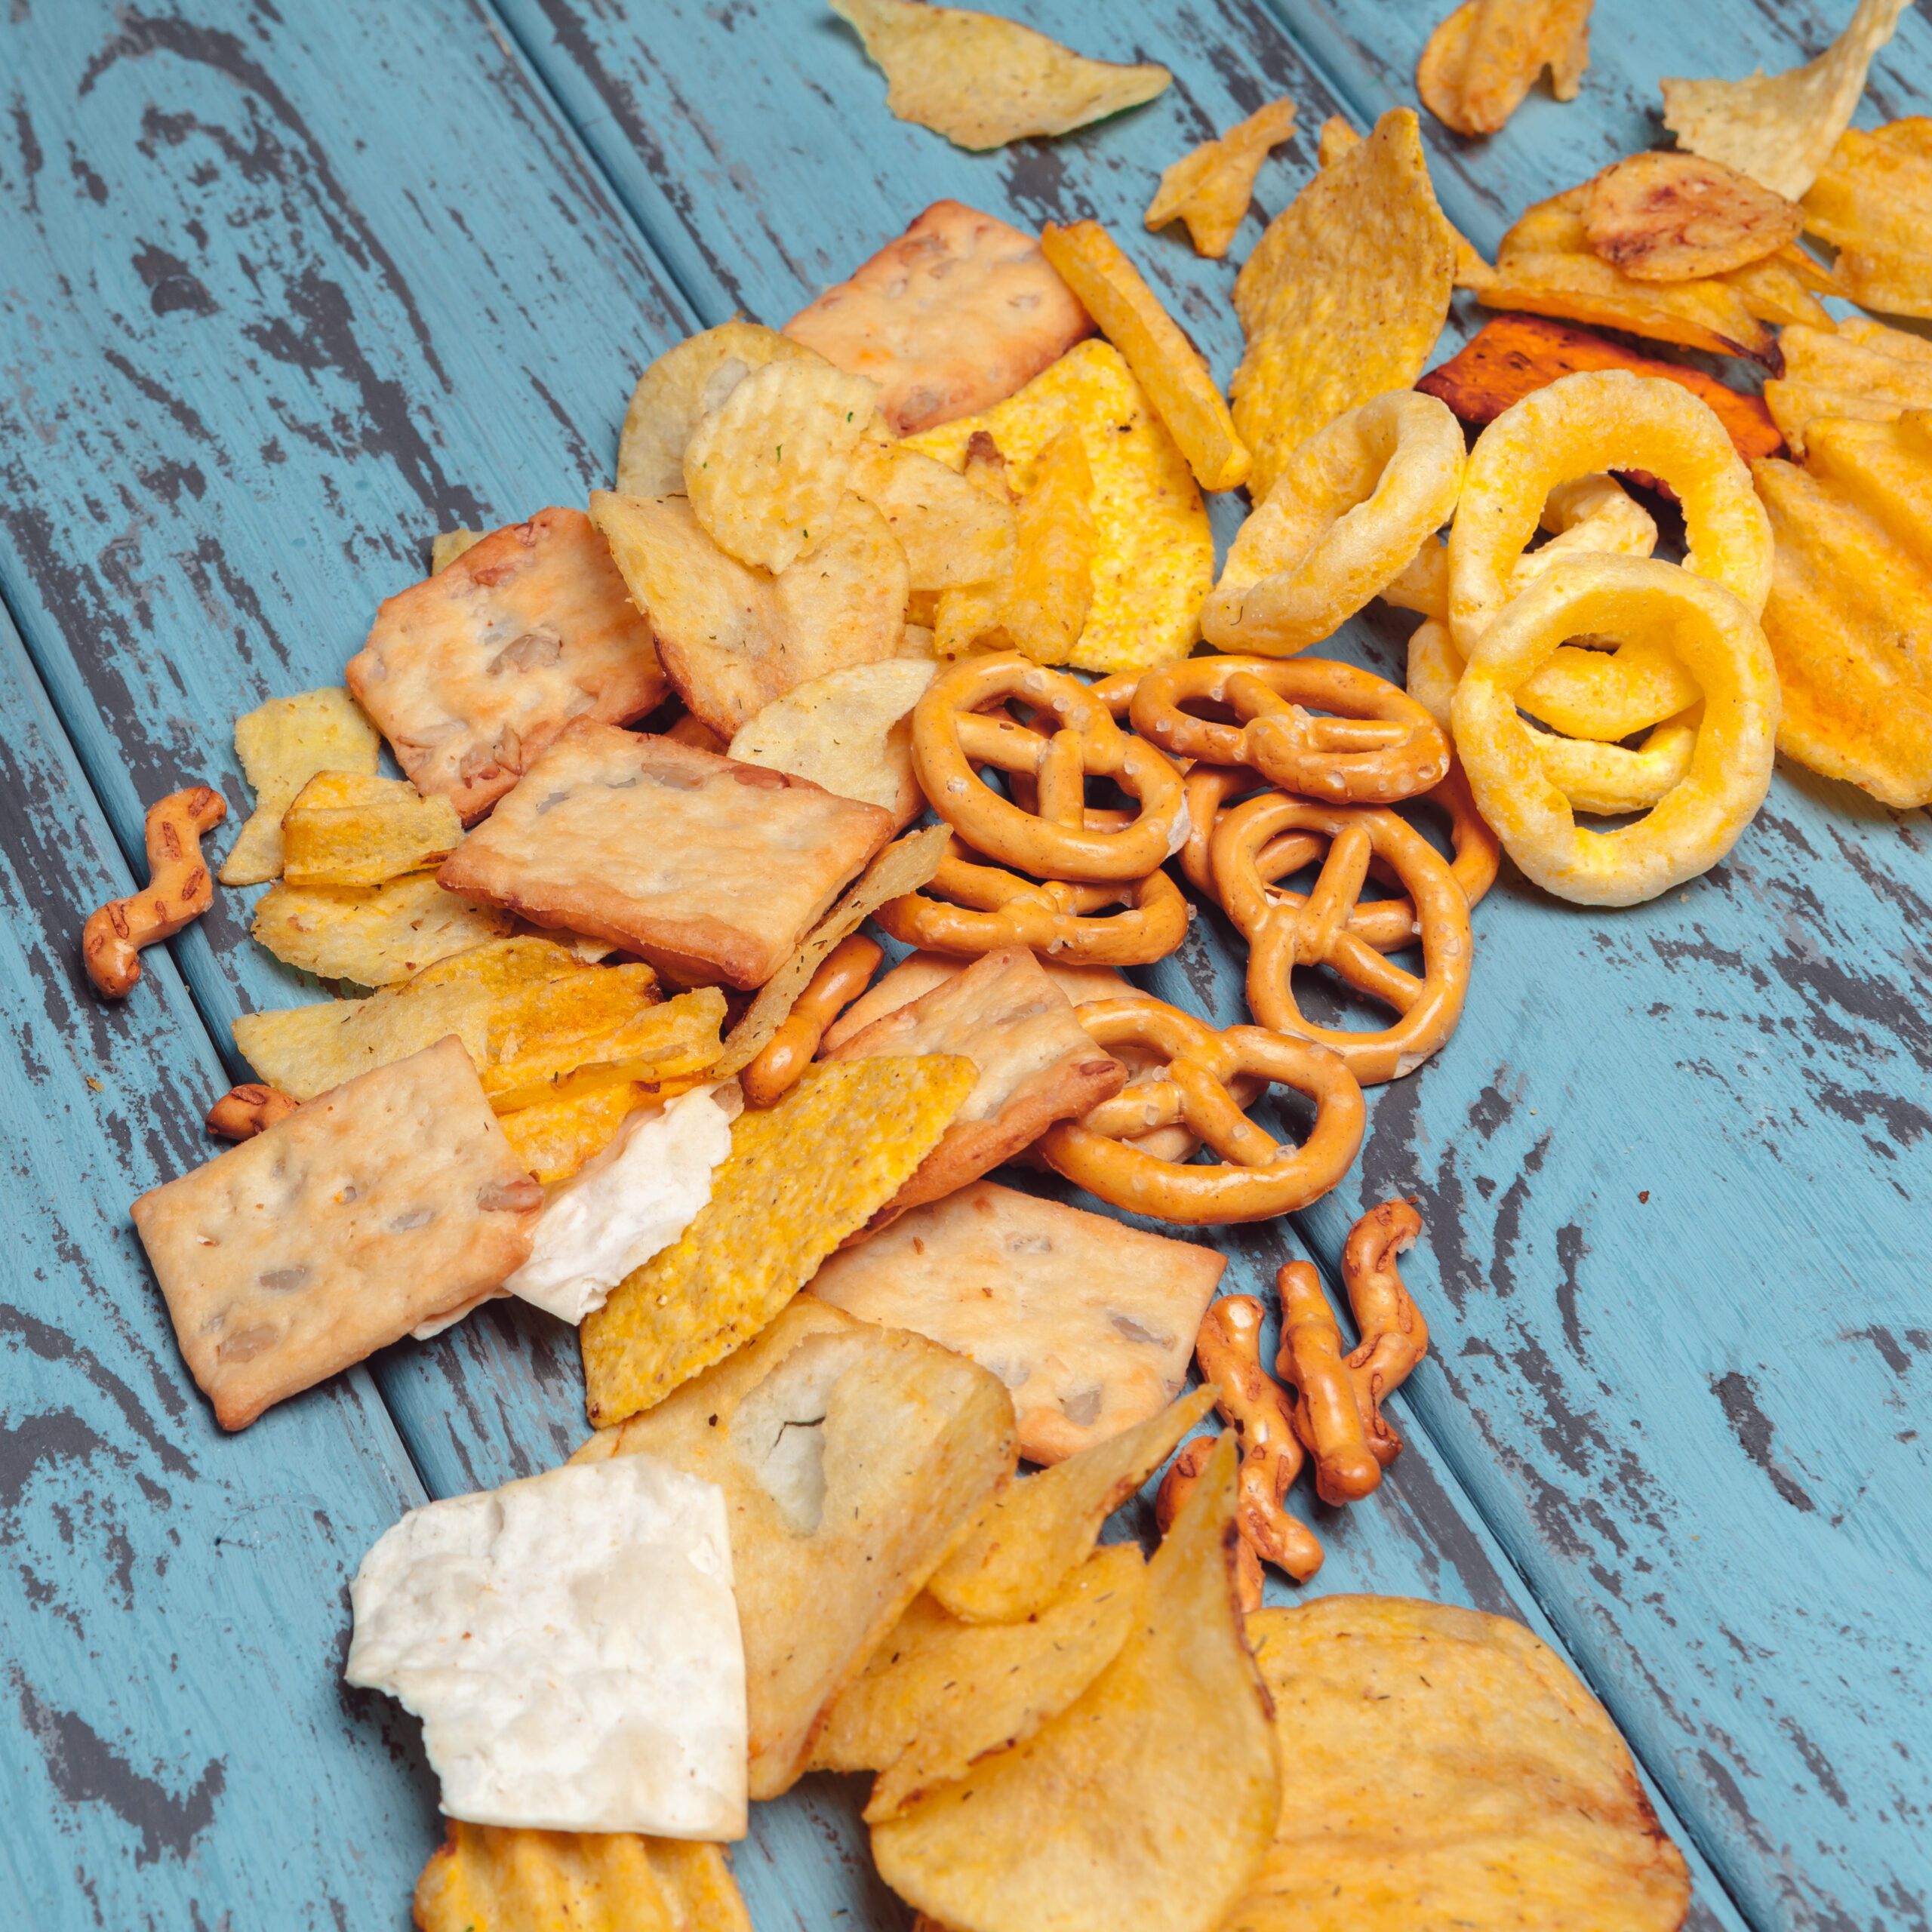 Salty snacks. Pretzels, chips, crackers on wooden background. Unhealthy products